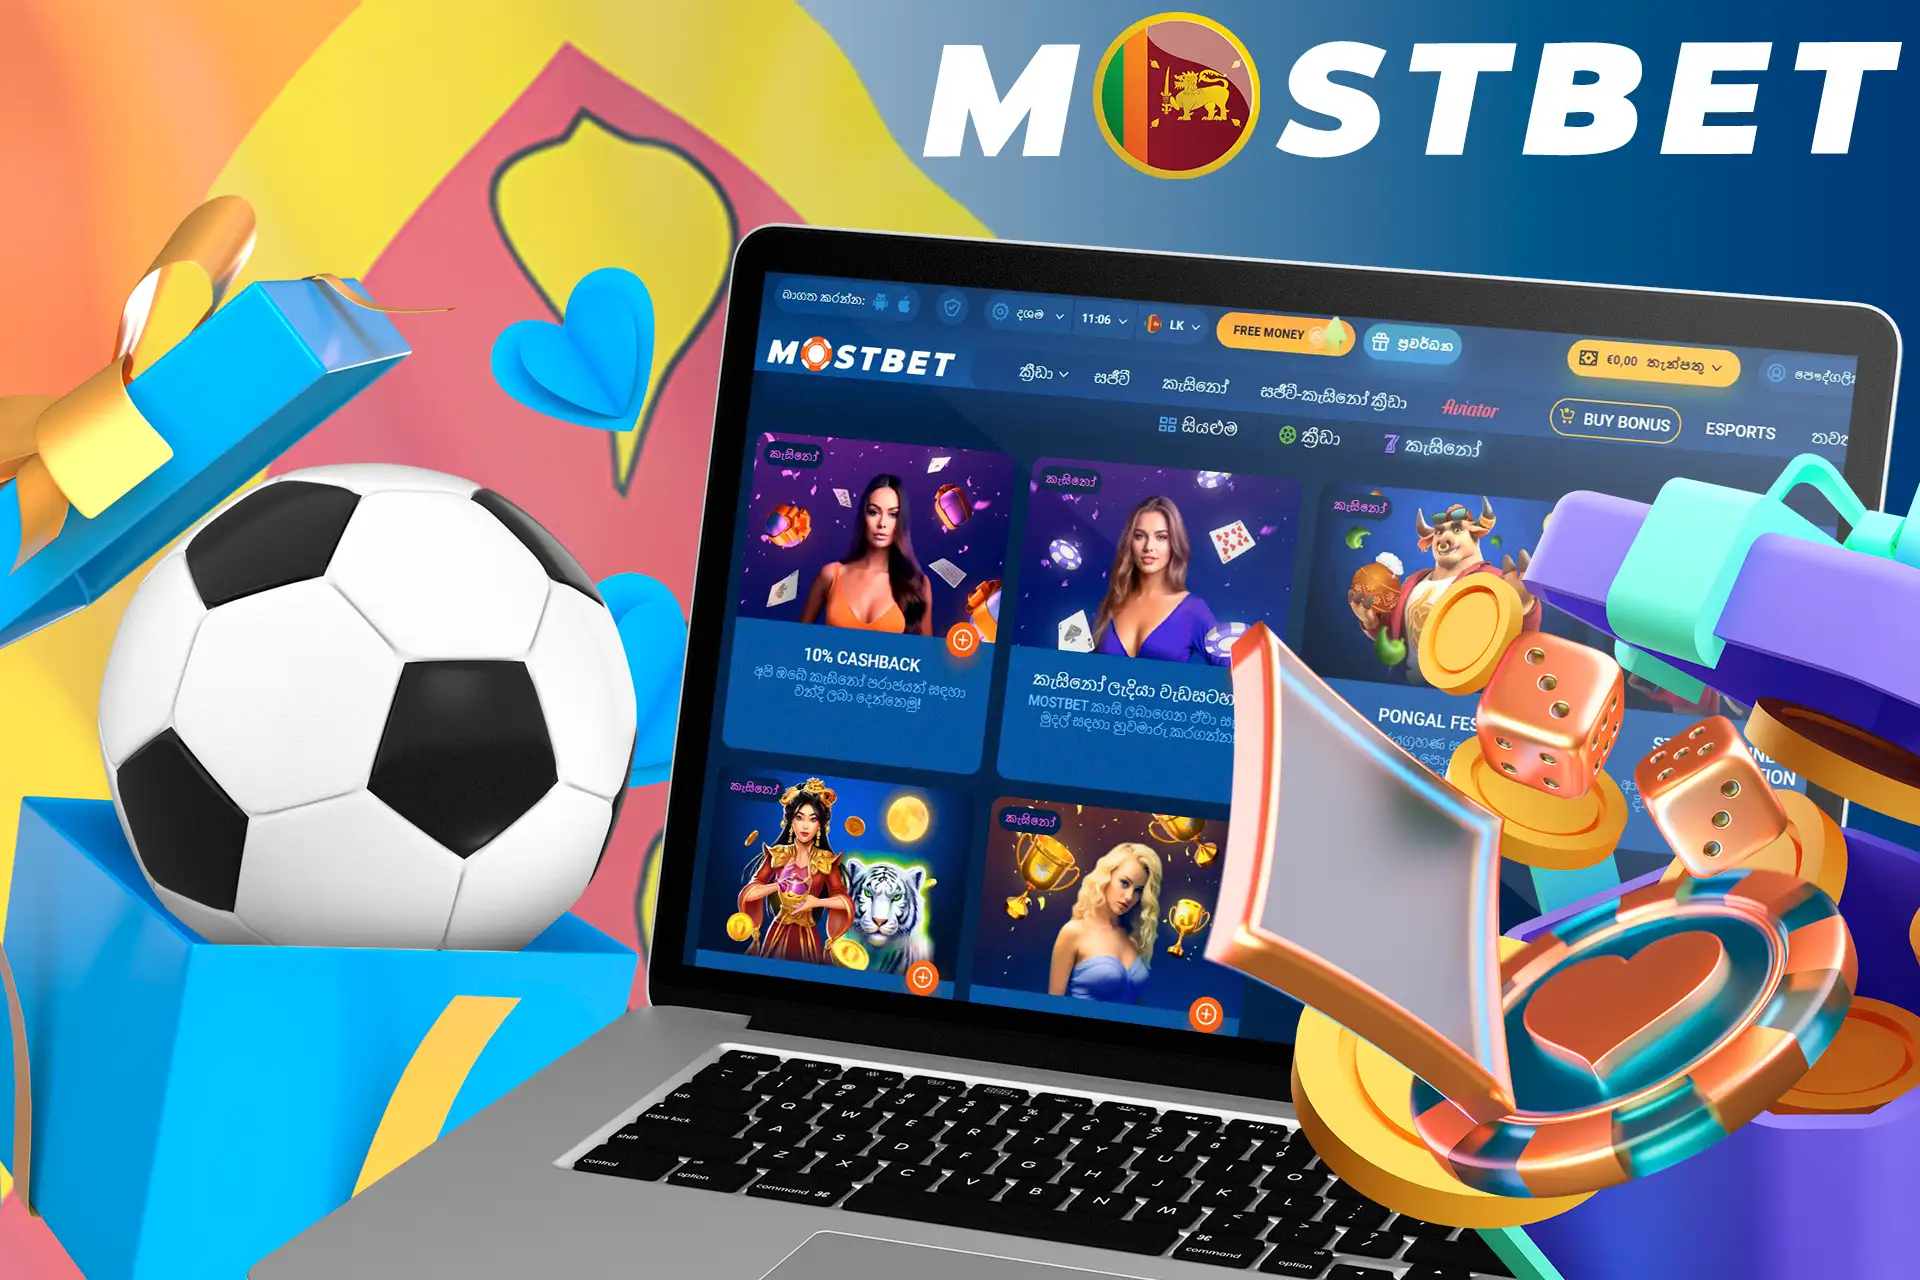 Check out the sports and casino bonuses at Mostbet Sri Lanka